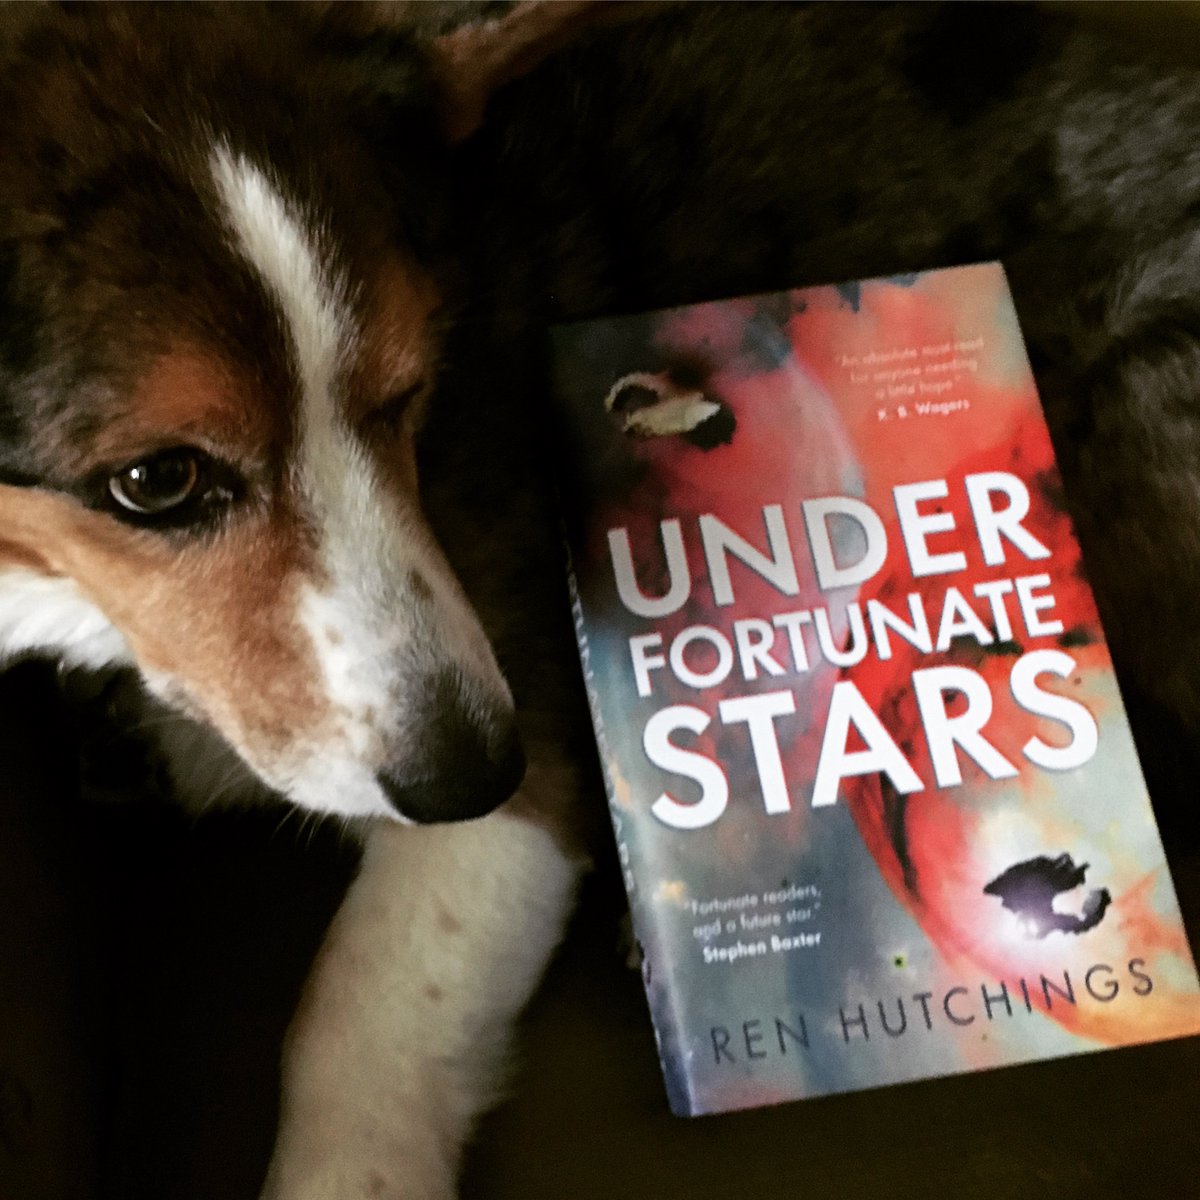 This is such a great book, pictured with such a good fox-pup! Happy birthday @voidcricket!